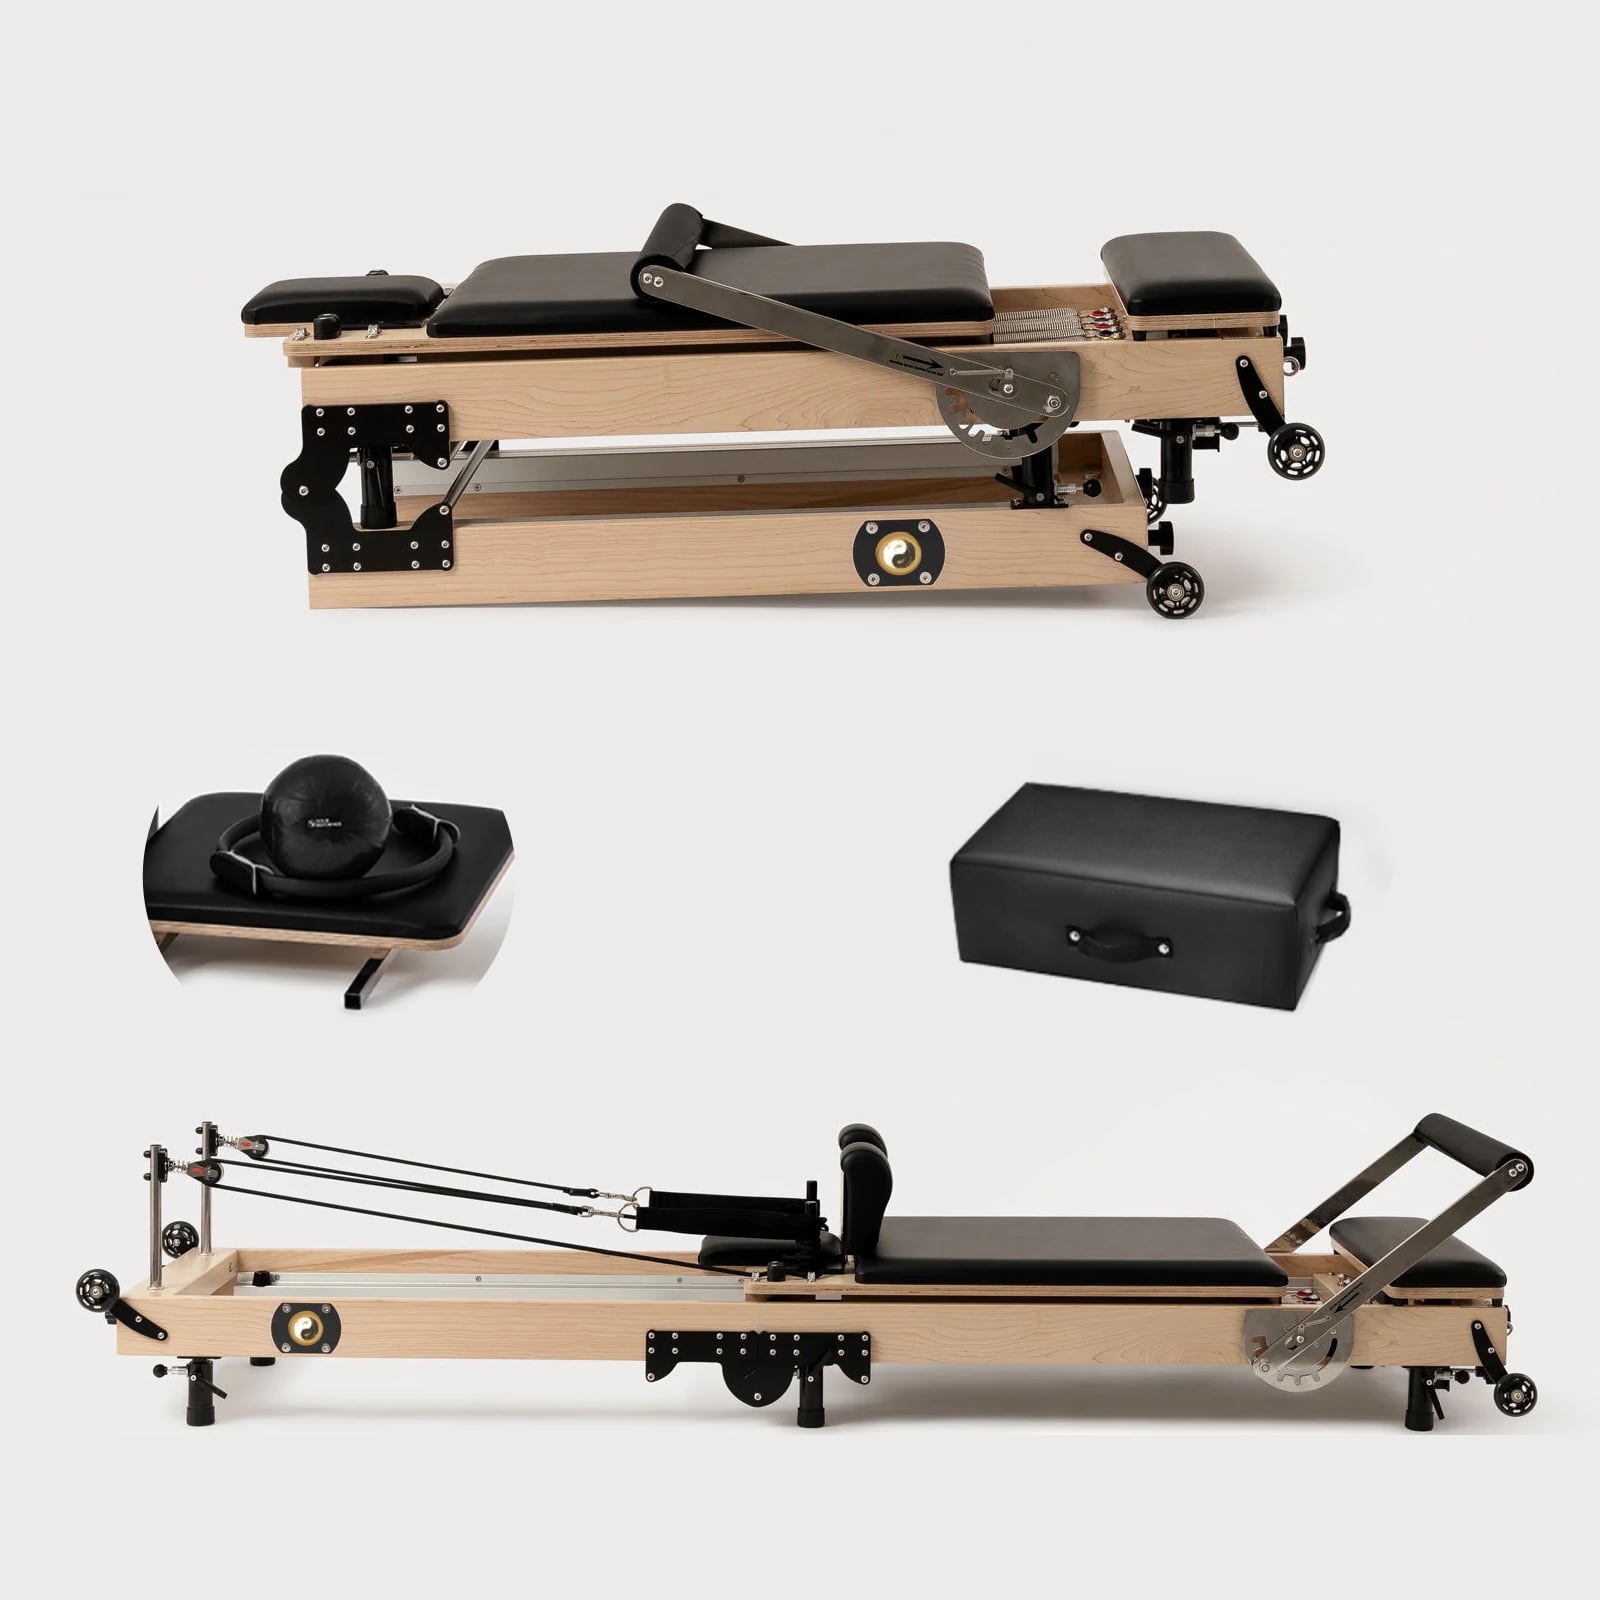 Pilates Reformer with Tower Machine Bed Sale with Pilates Reformer Springs  and Reformer Mat - China Gym Machine and Yoga price